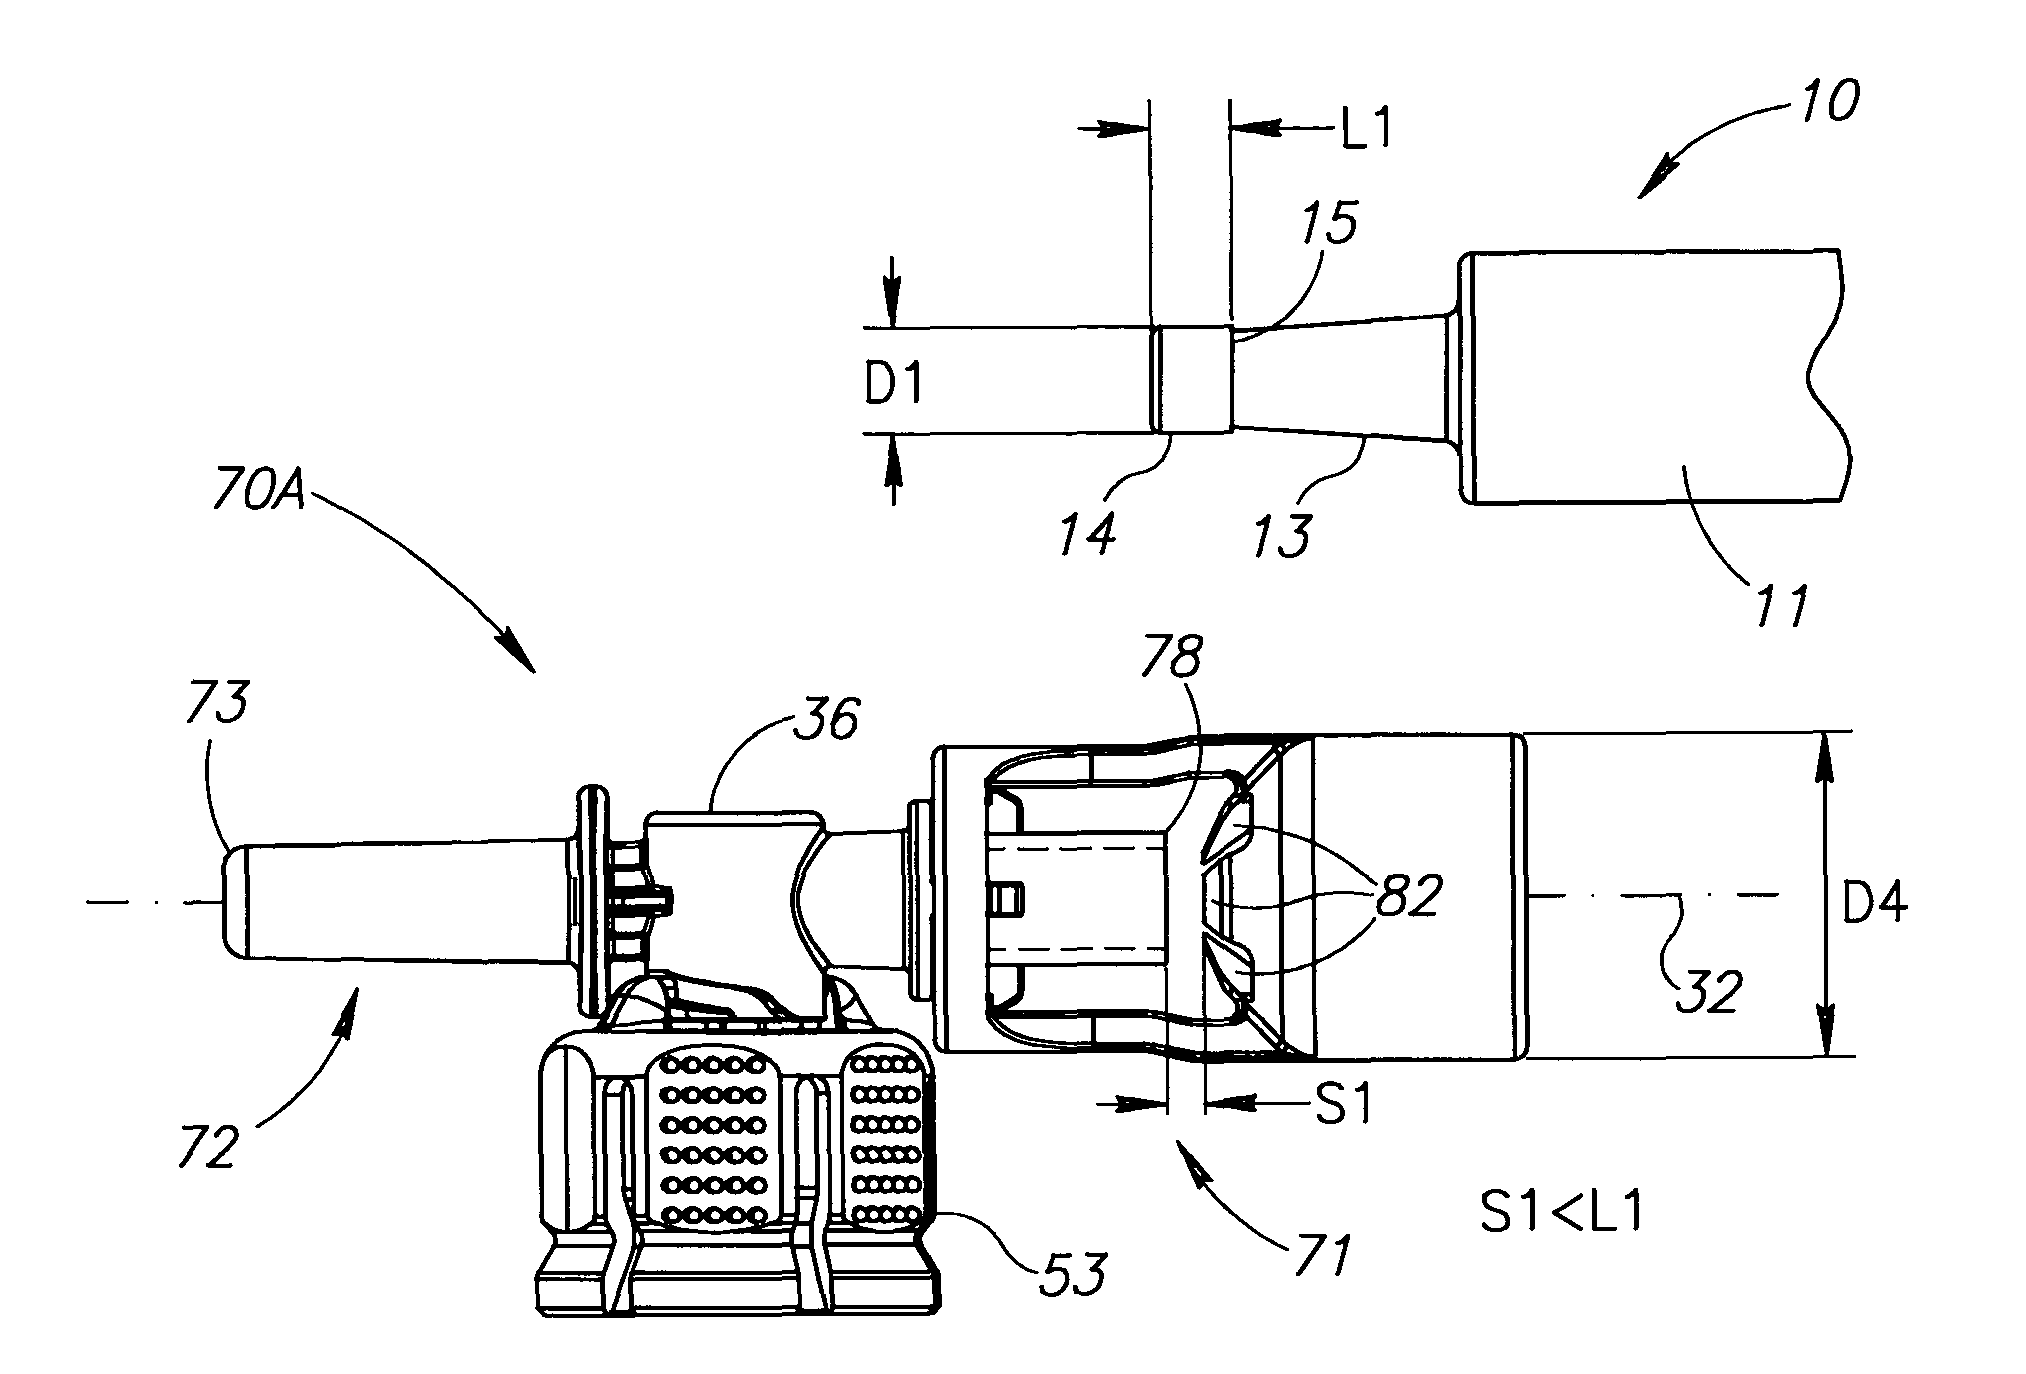 Liquid drug delivery devices for use with syringes with widened distal tips